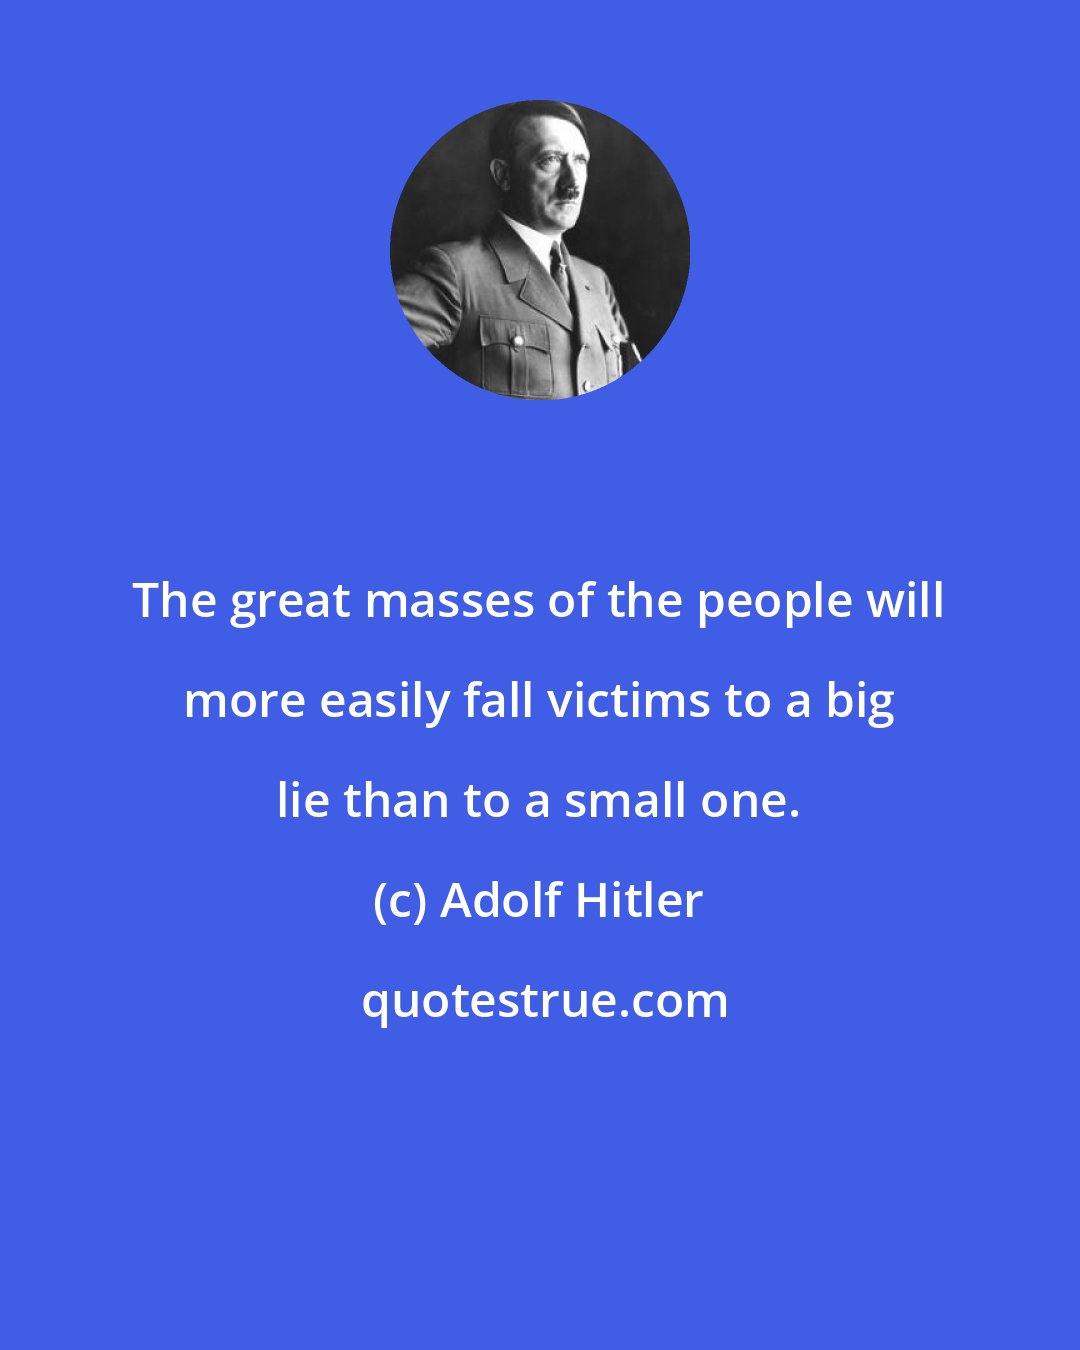 Adolf Hitler: The great masses of the people will more easily fall victims to a big lie than to a small one.